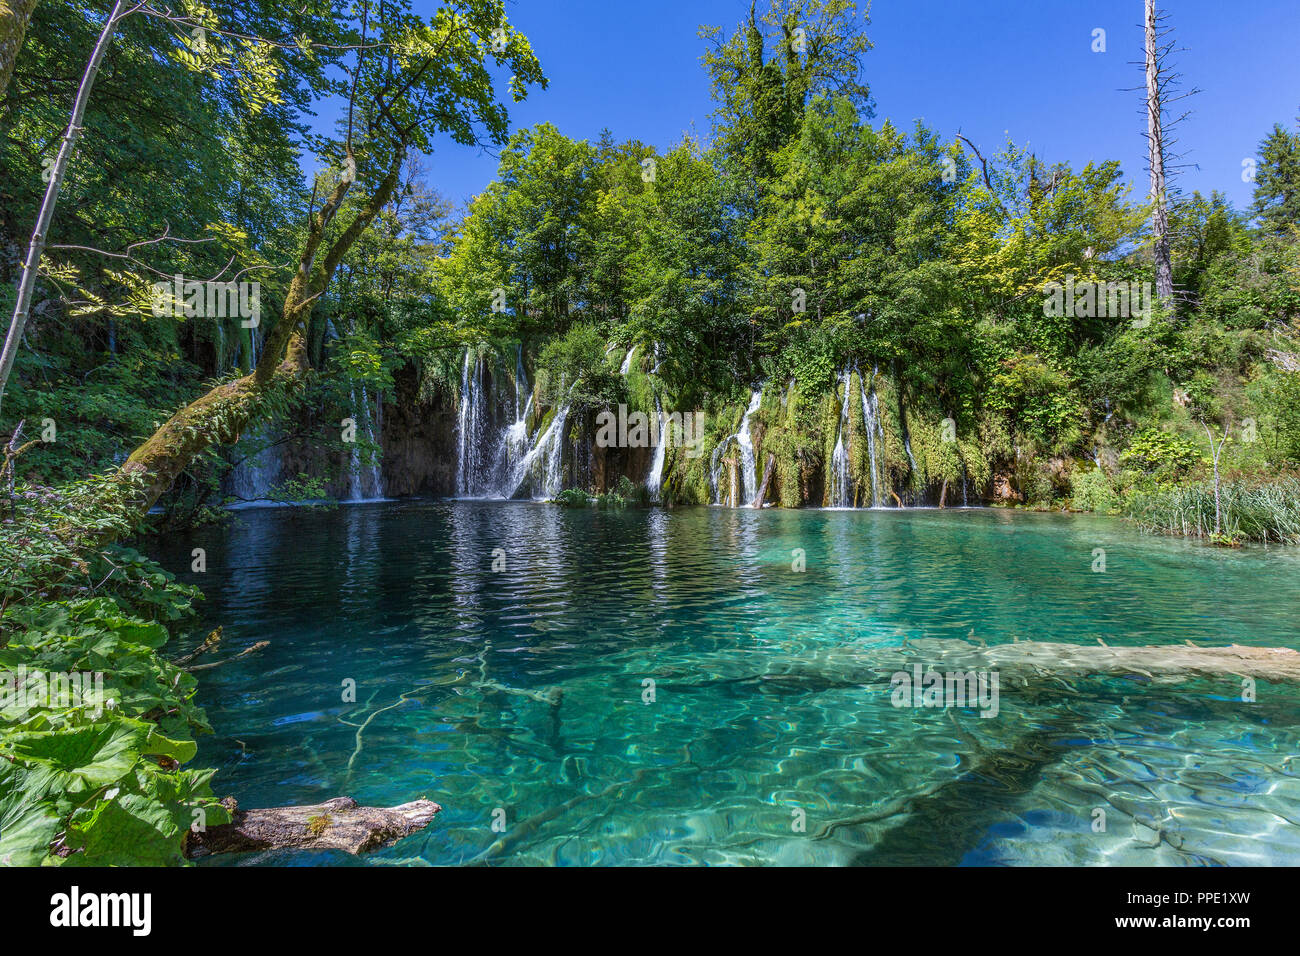 Plitvice Lakes National Park, Croatia - The national park was founded in 1949 and is situated in the mountainous karst area of central Croatia, at the Stock Photo